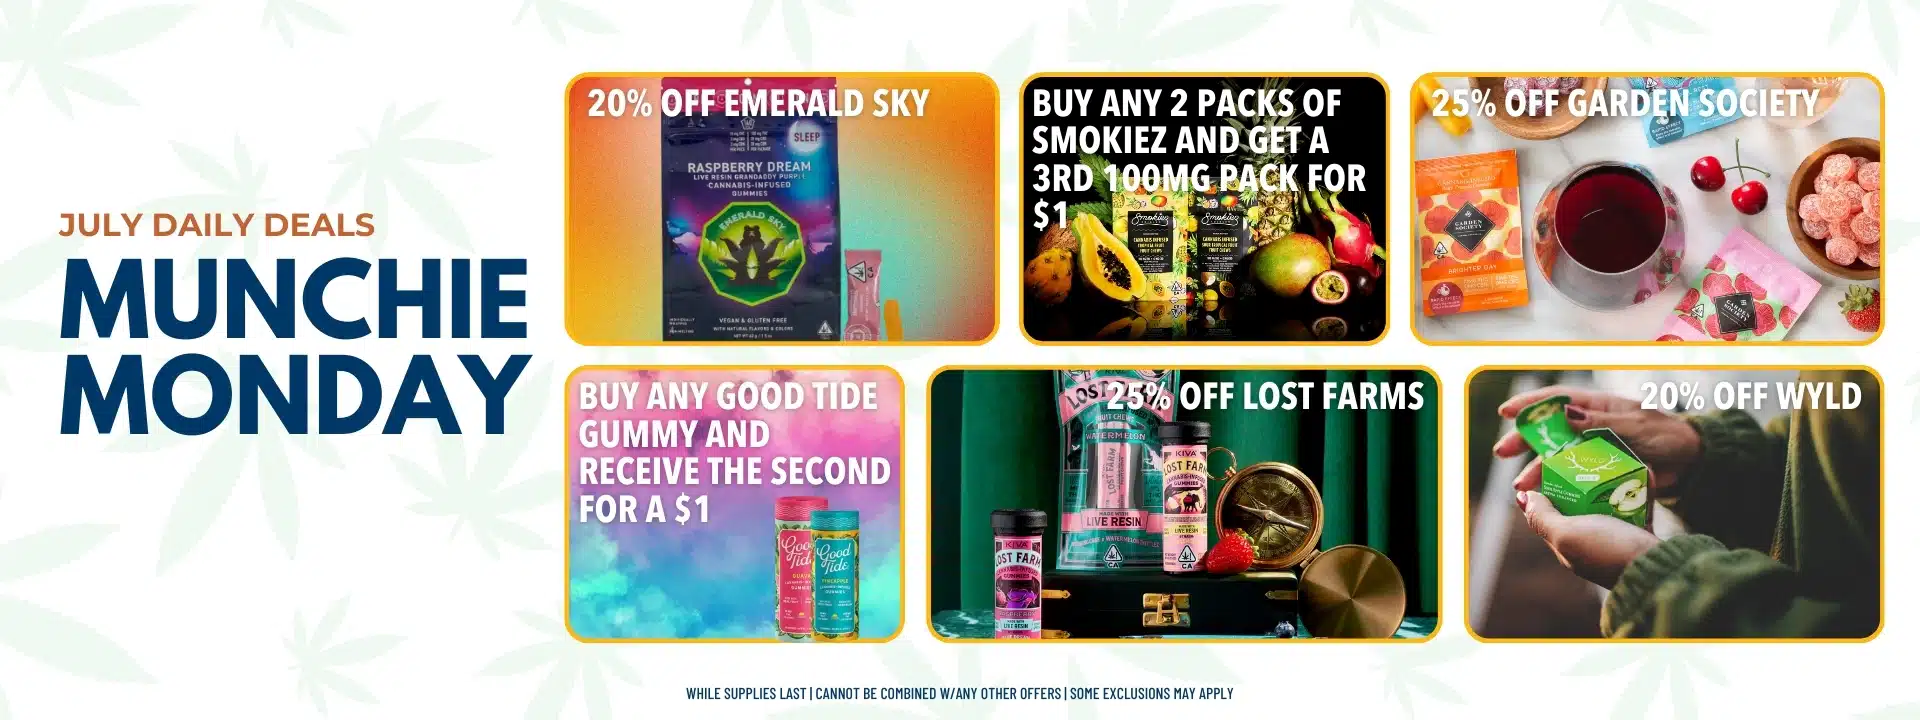 Product images with text overlay that reads: July Daily Deals Munchie Monday. 20% off Emerald Sky, Buy any 2 packs of Smokiez and get a 3rd 100mg pack for $1, 25% off Garden Society, Buy any Good Tide Gummy and receive the second for $1, 25% off Lost Farms, 20% off Wyld.